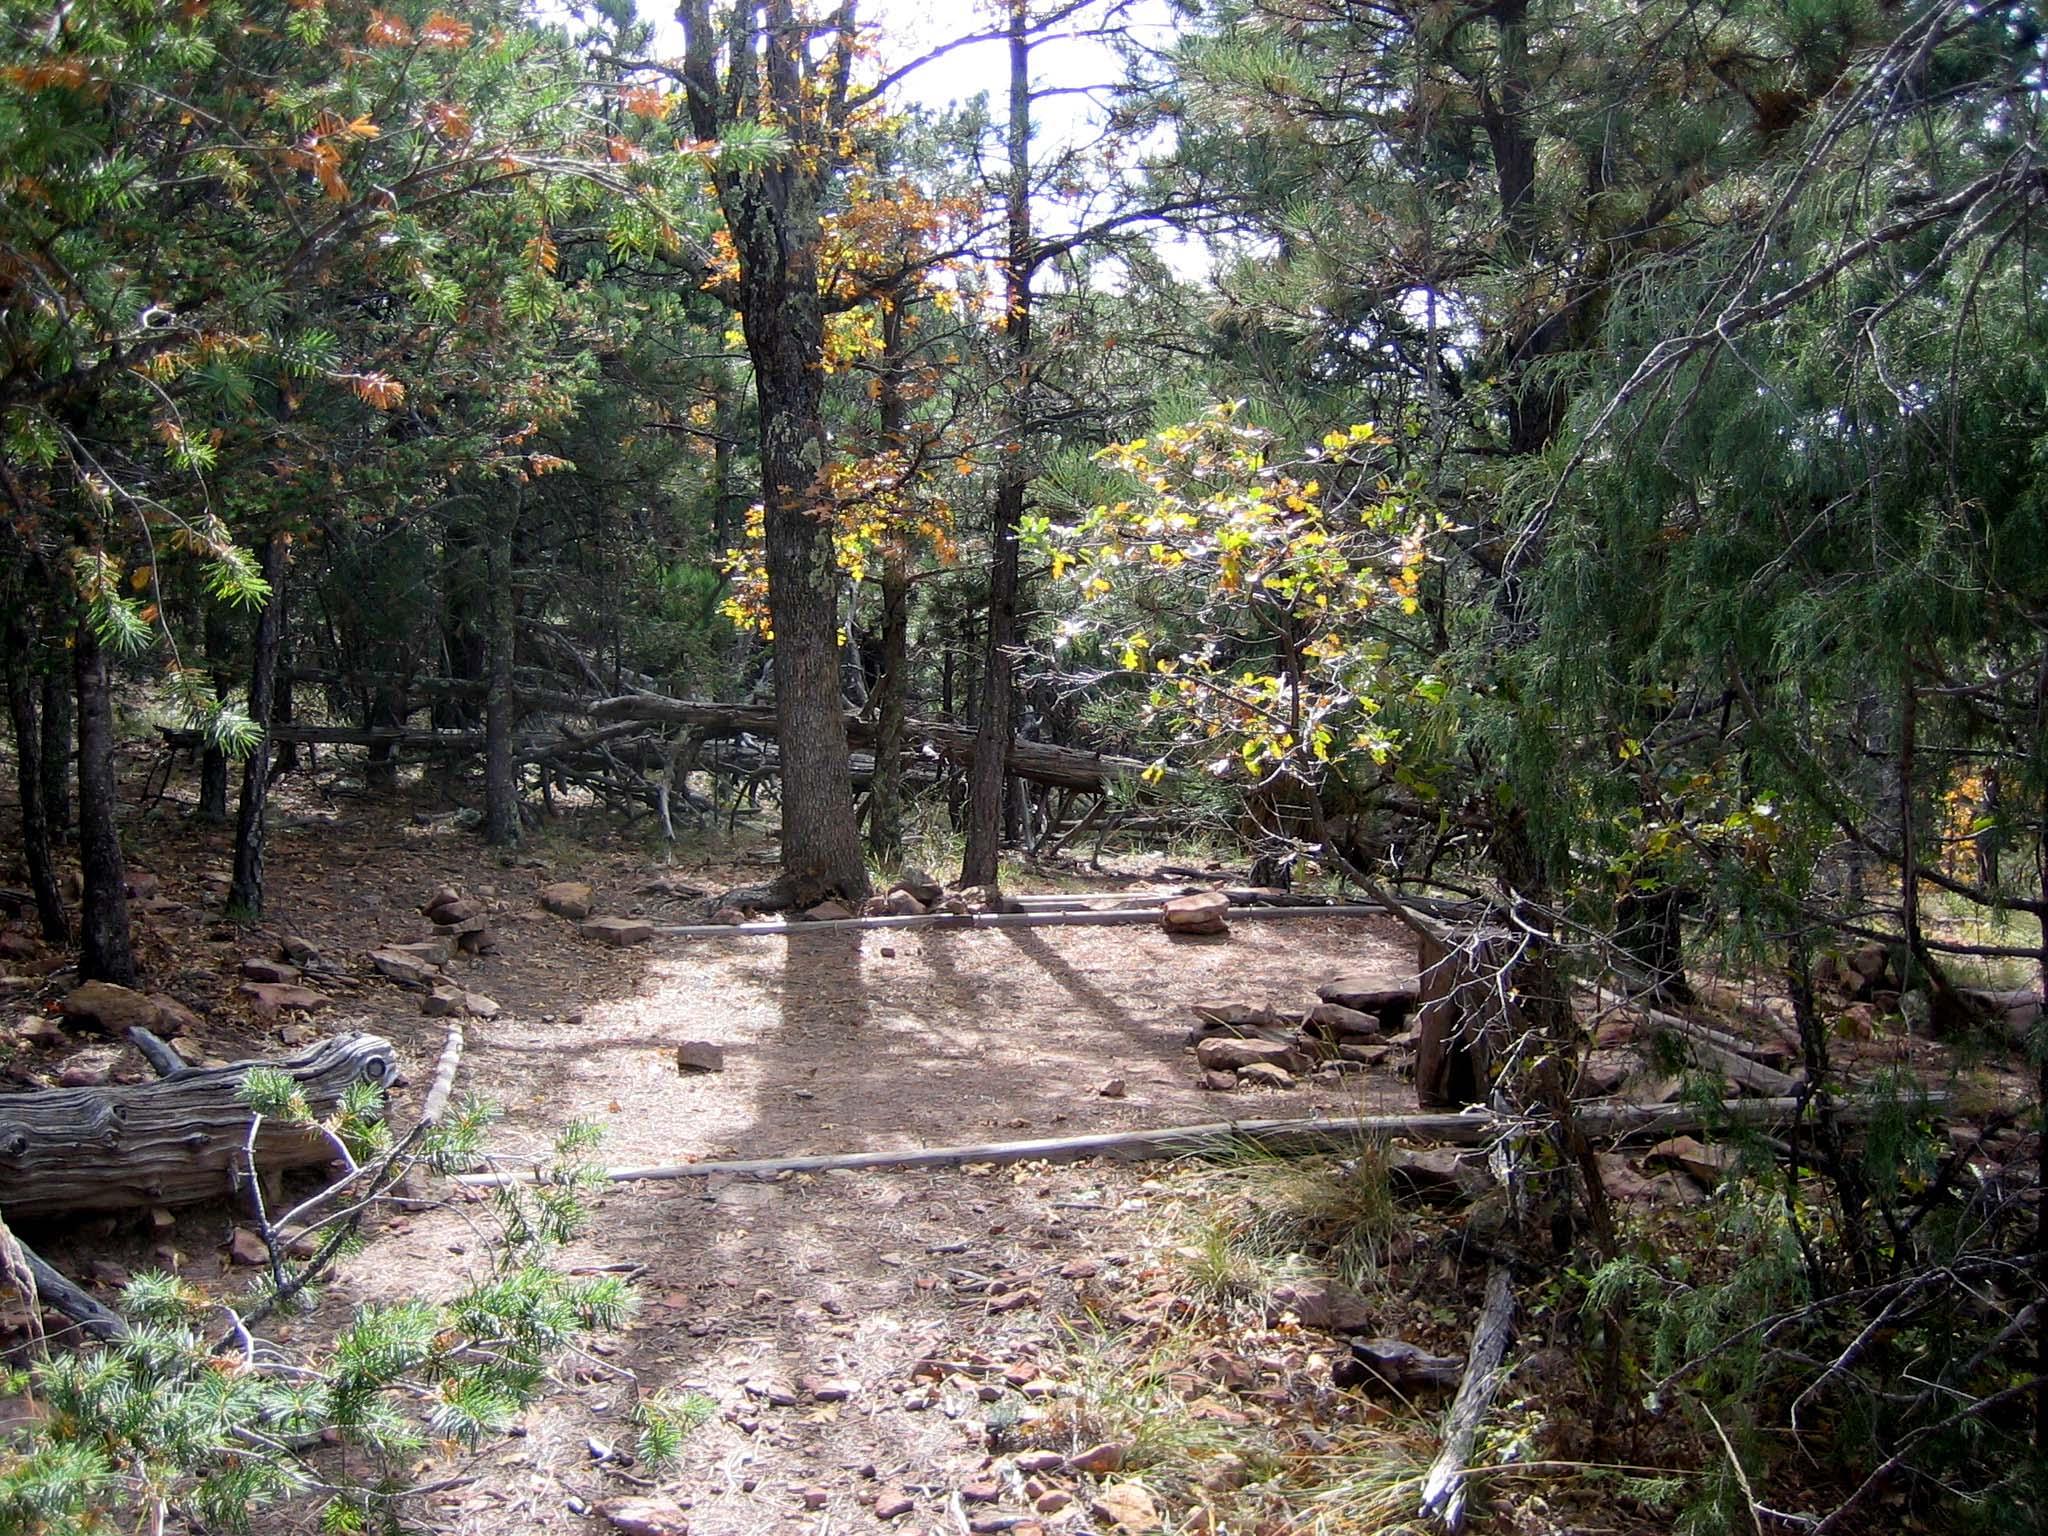 A hardened surface for a tent in a forested location